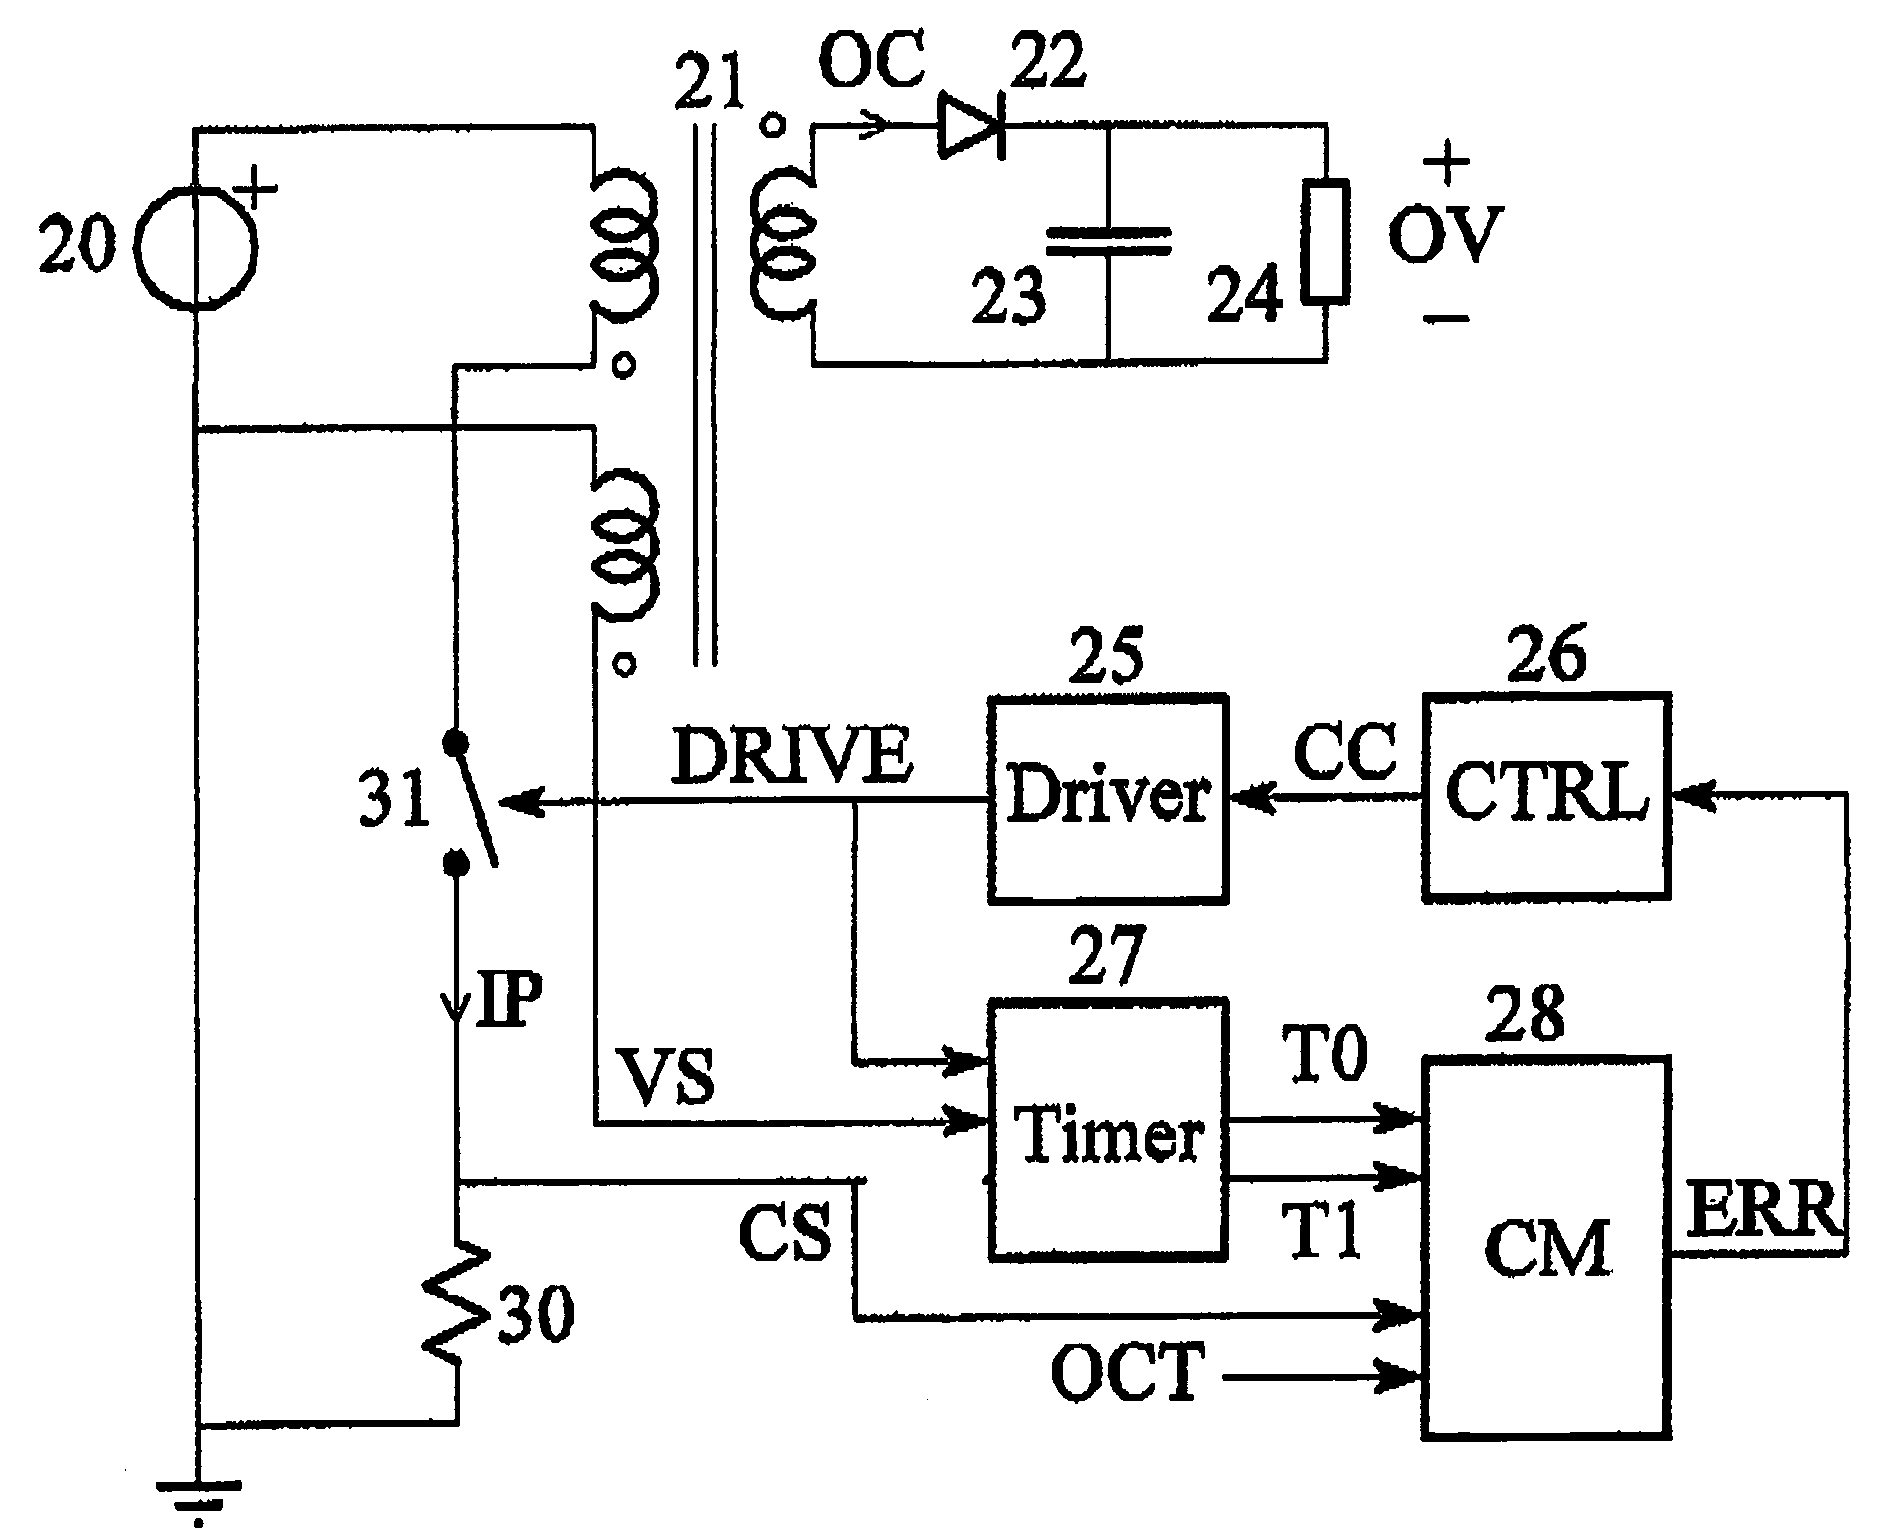 Switch mode power supply systems